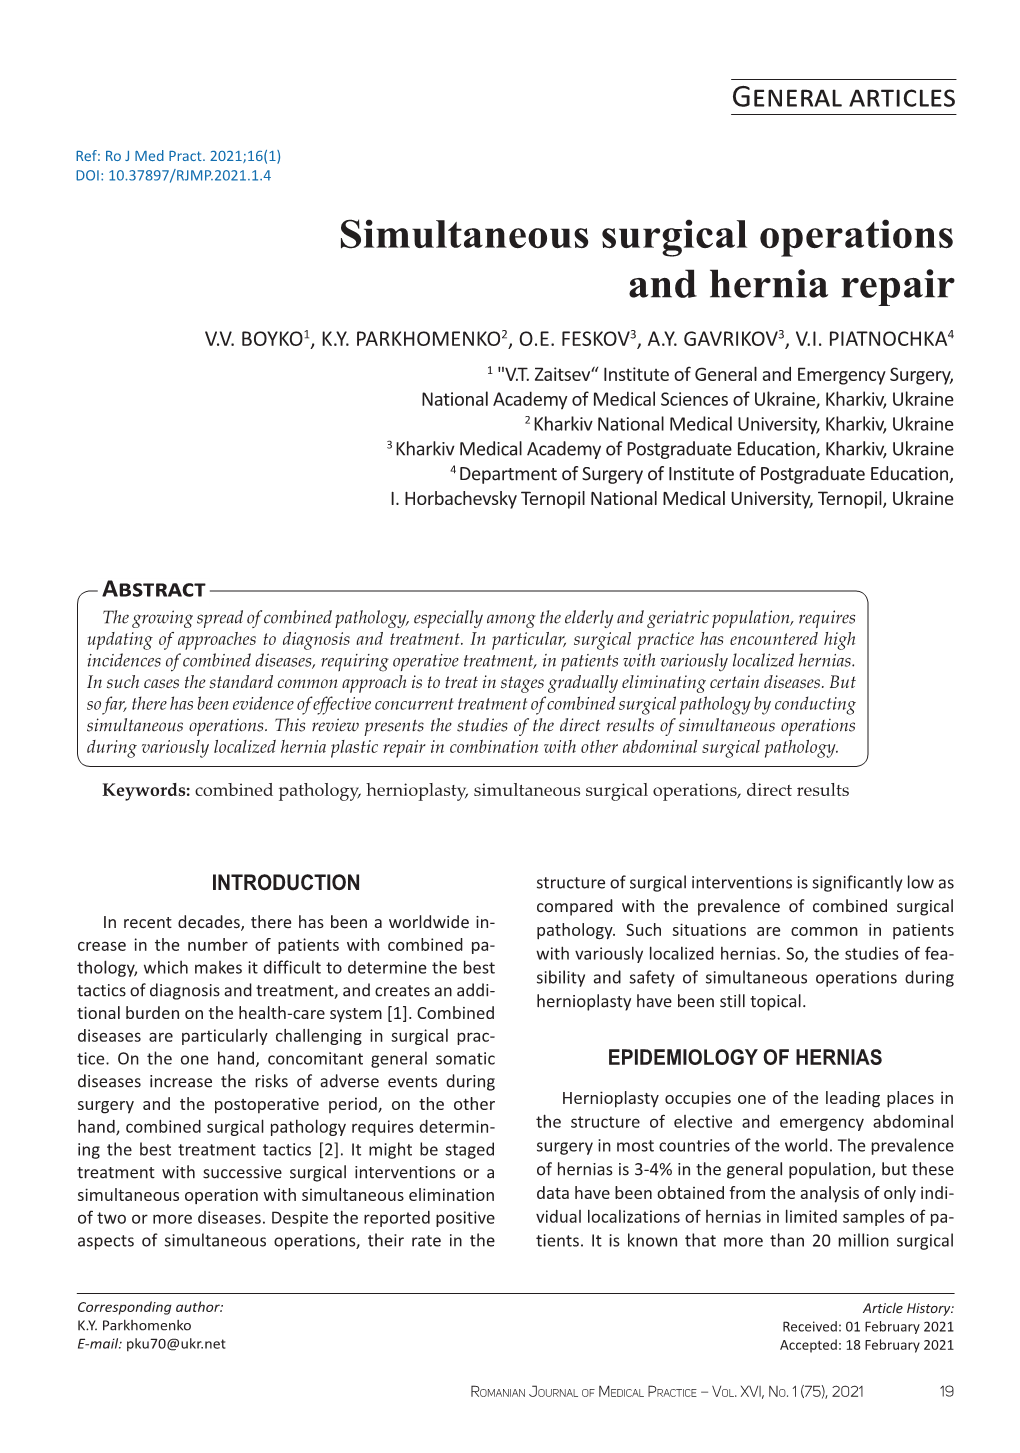 Simultaneous Surgical Operations and Hernia Repair V.V